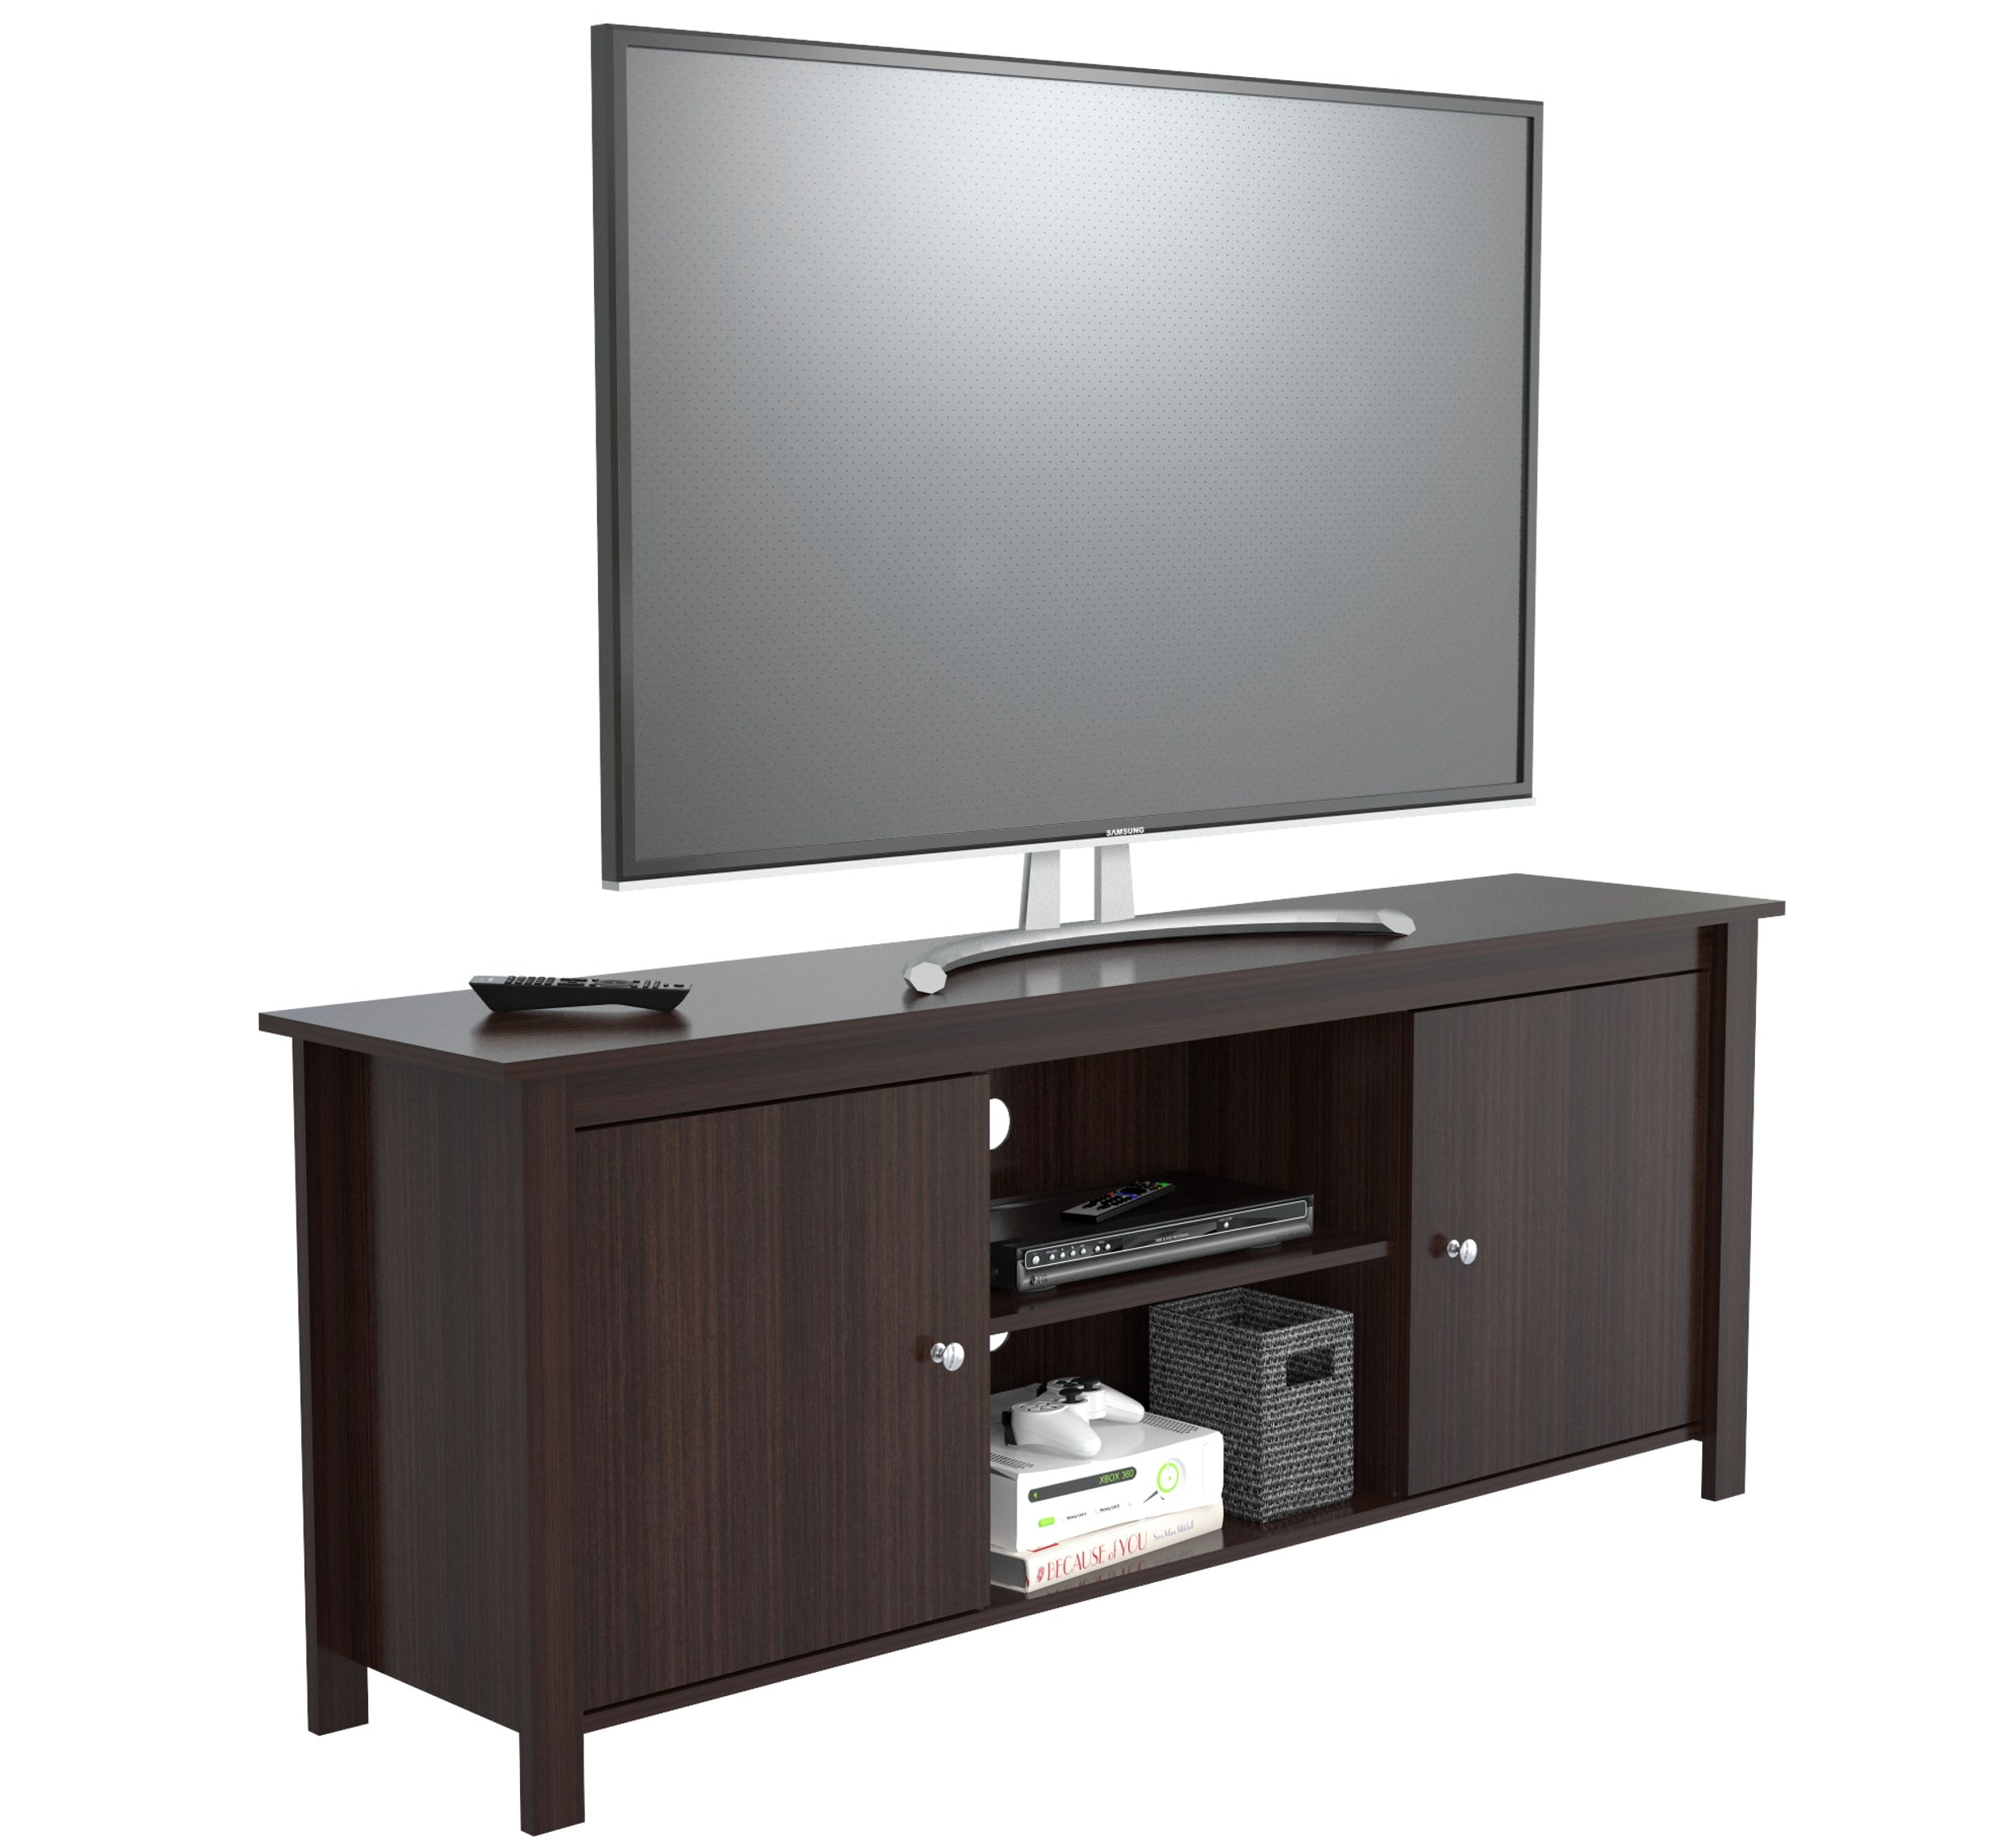 Details about   TV STAND ENTERTAINMENT CENTER Corner Media TVs up to 60 Inch Brown Espresso 